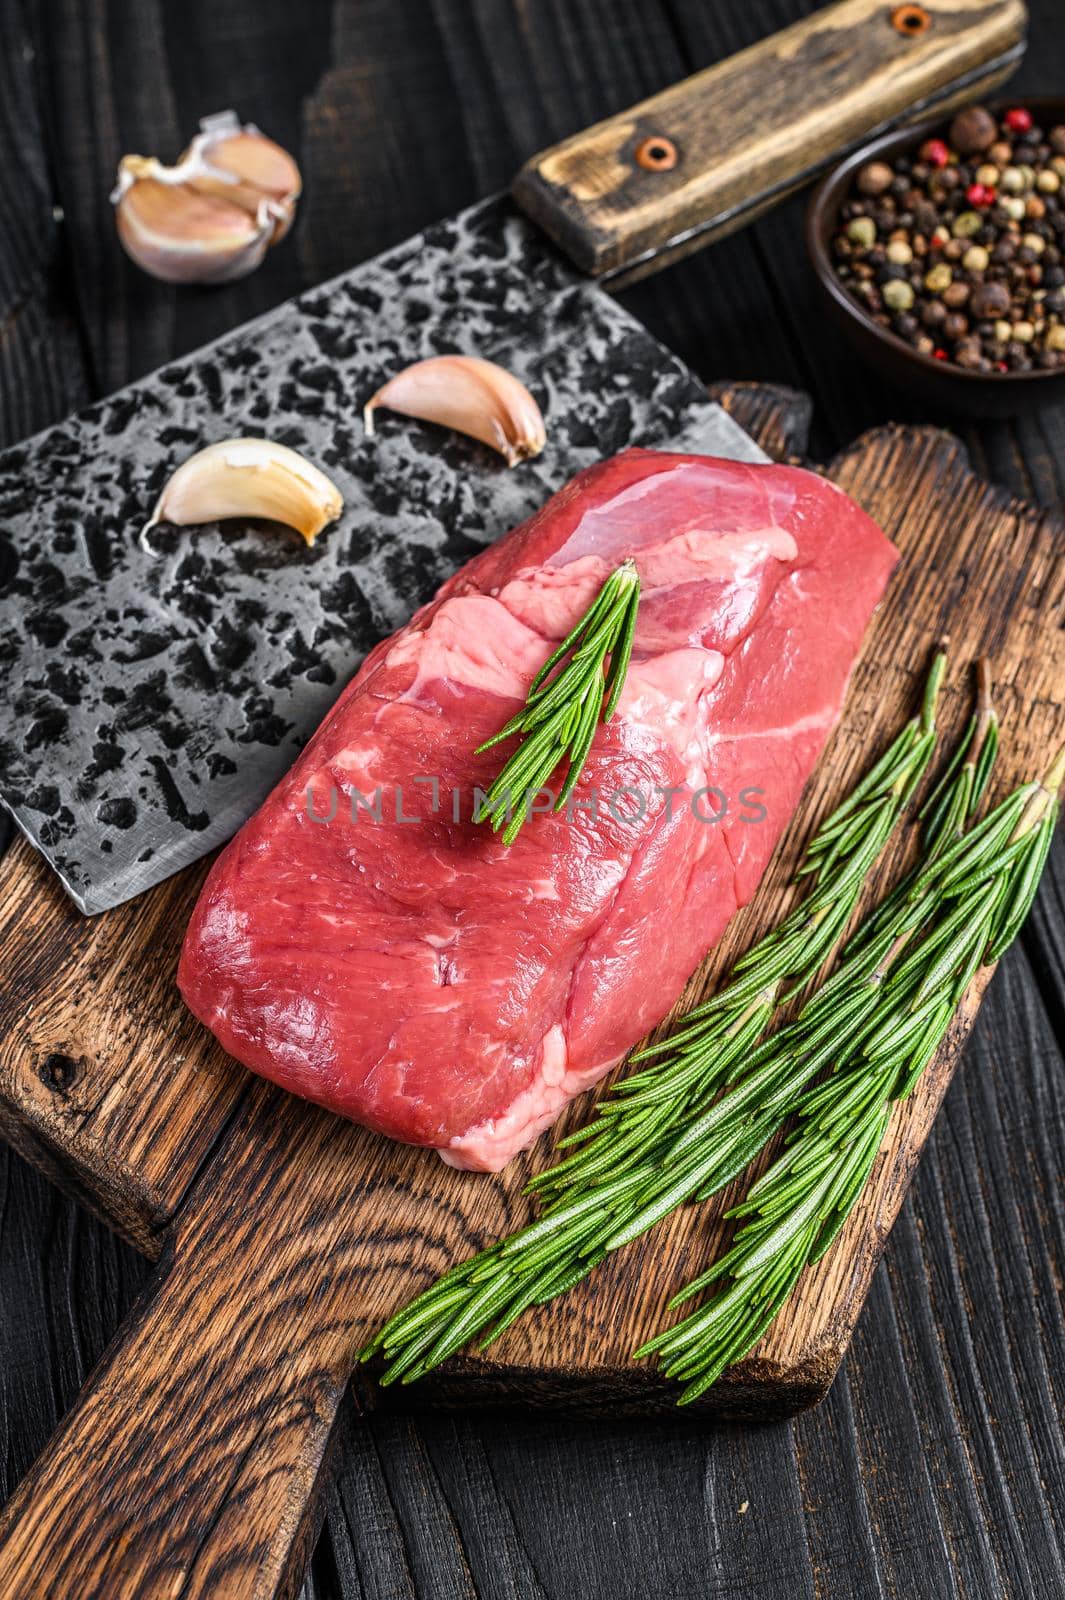 Fresh Raw veal sirloin meat steak on a wooden cutting board. Black wooden background. Top view.